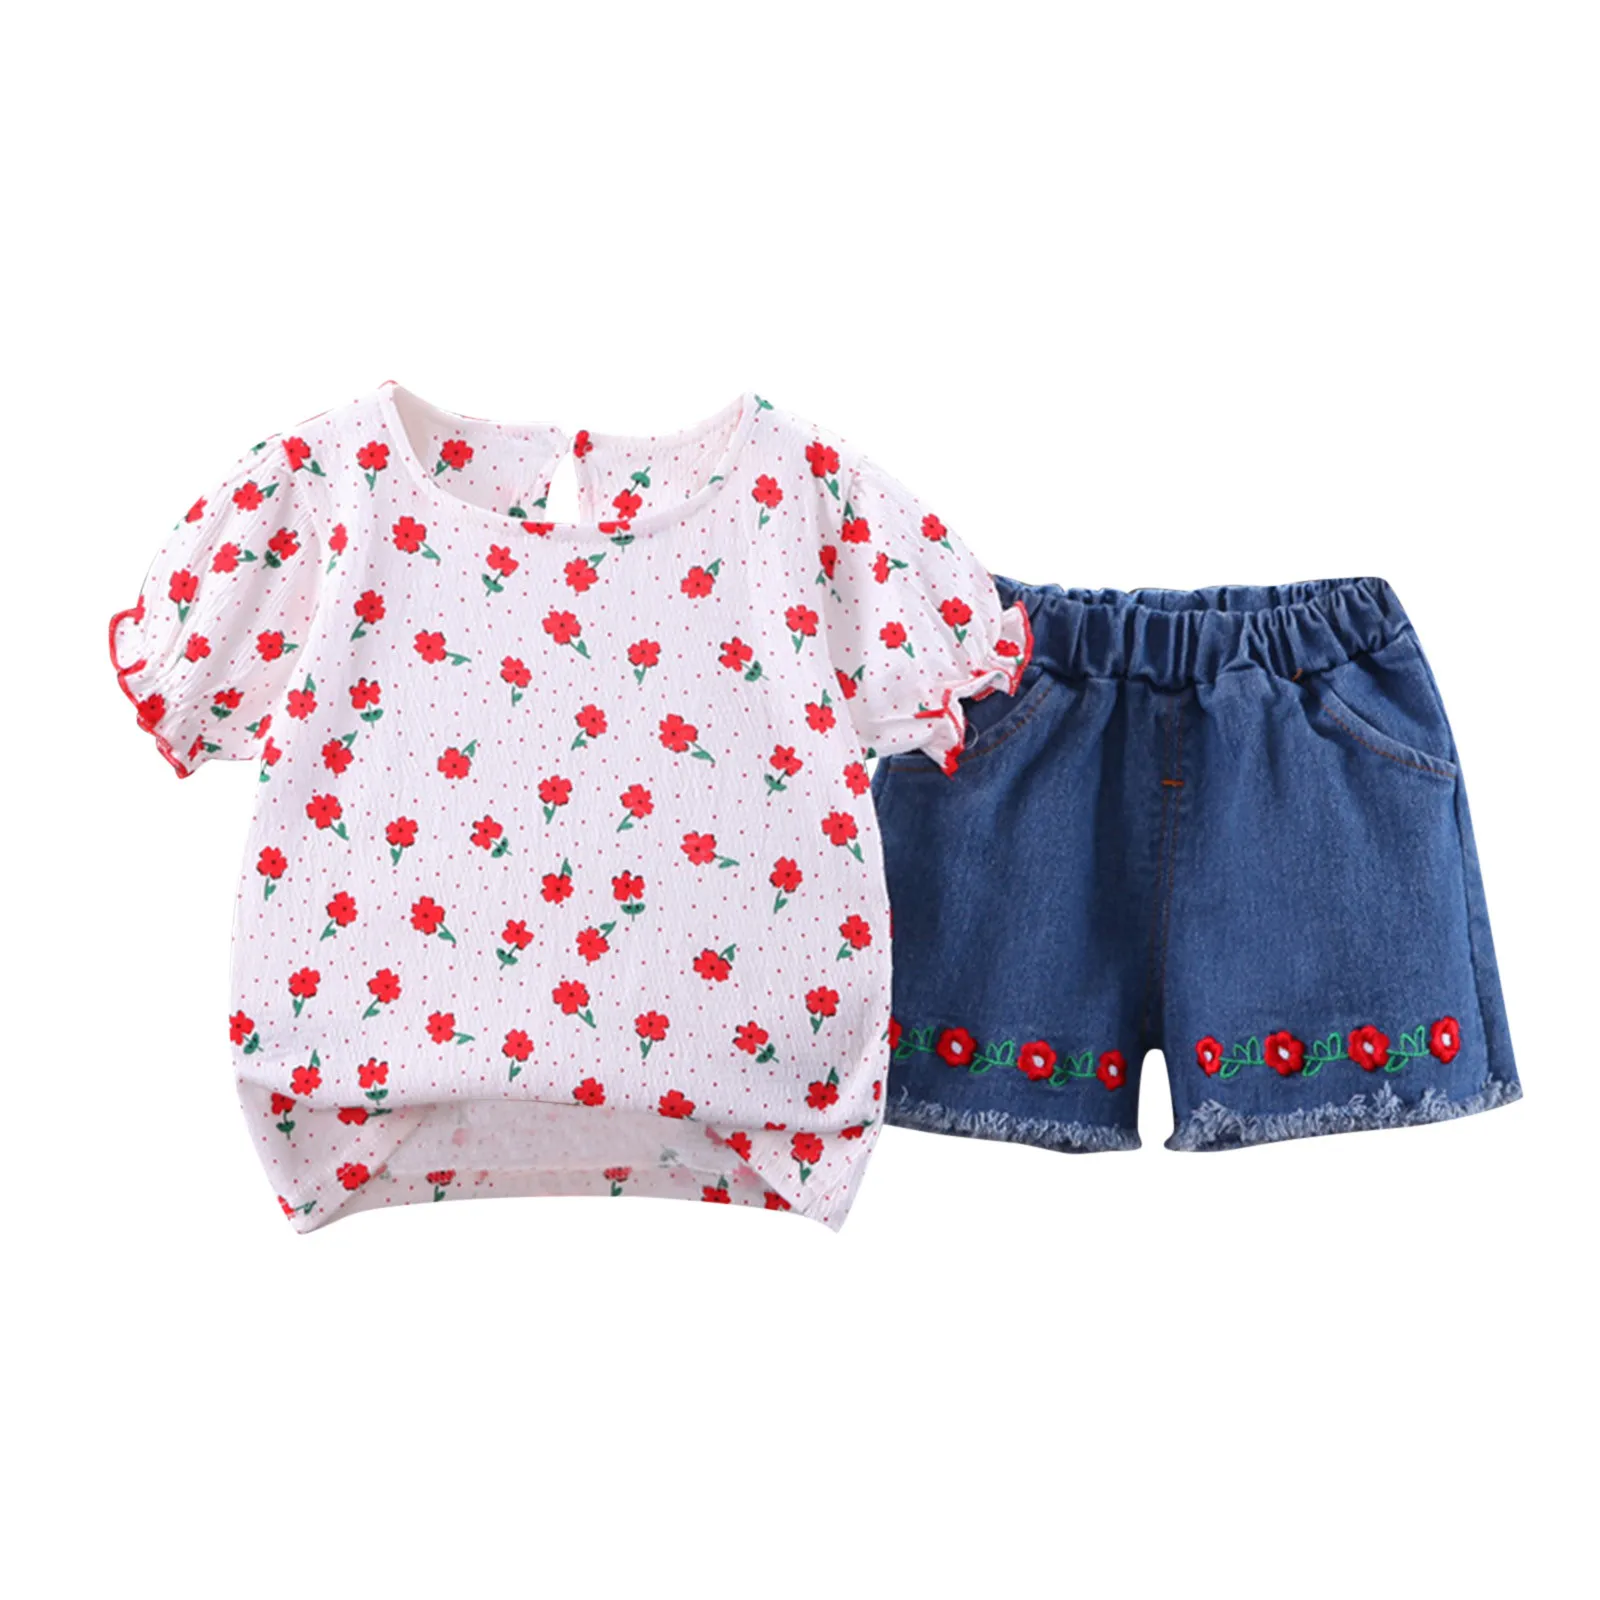 18months-baby Girl Clothes Toddler Kids Girls Clothes Short Sleeve Floral  Print T Shirt Top Jeans Shorts Casual 2PCS Little Blue | АлиЭкспресс